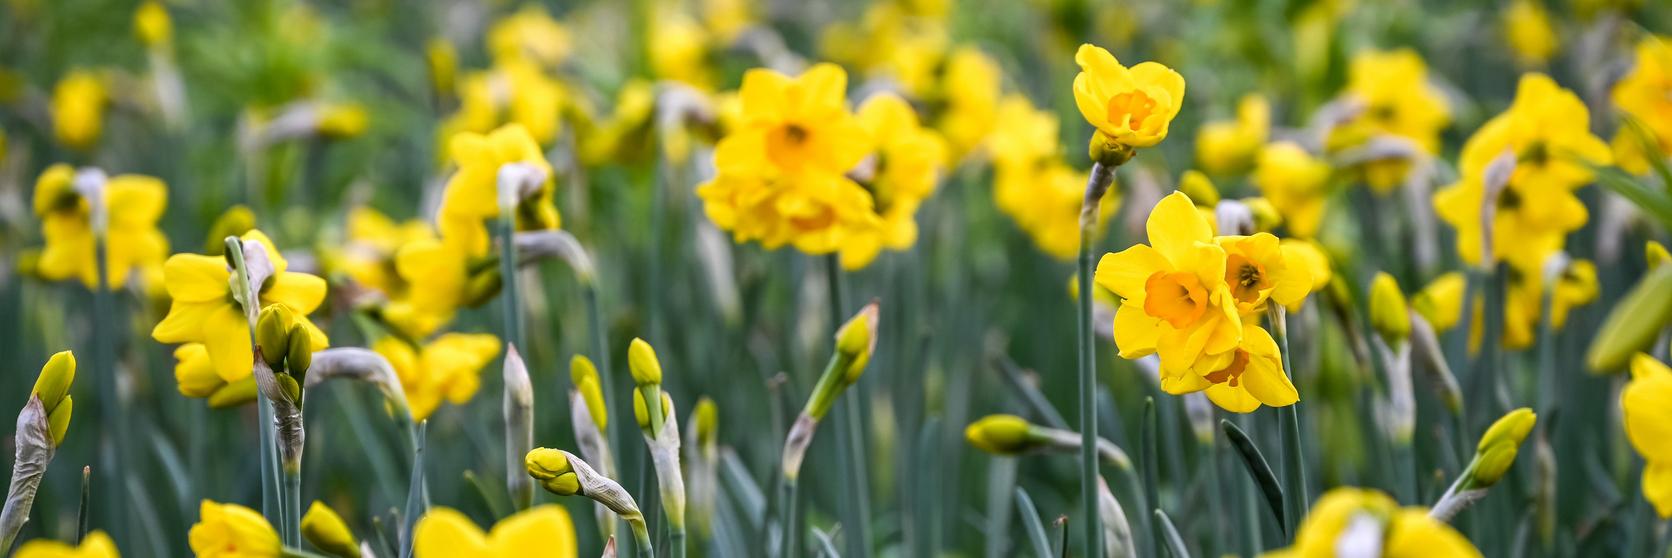 Narcissus Flower Meaning Symbolism & Facts | Interflora